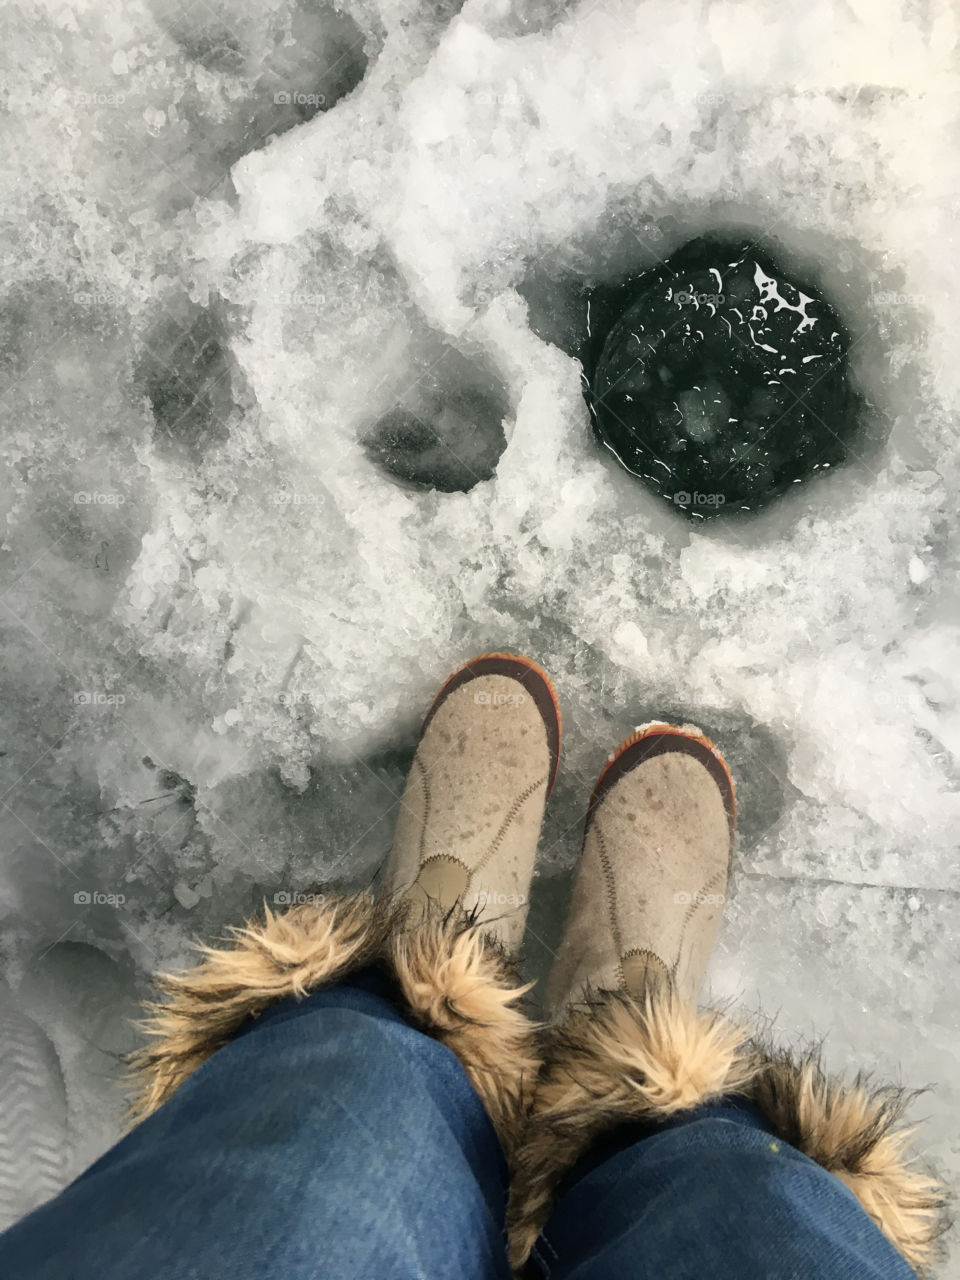 A person standing near the ice hole